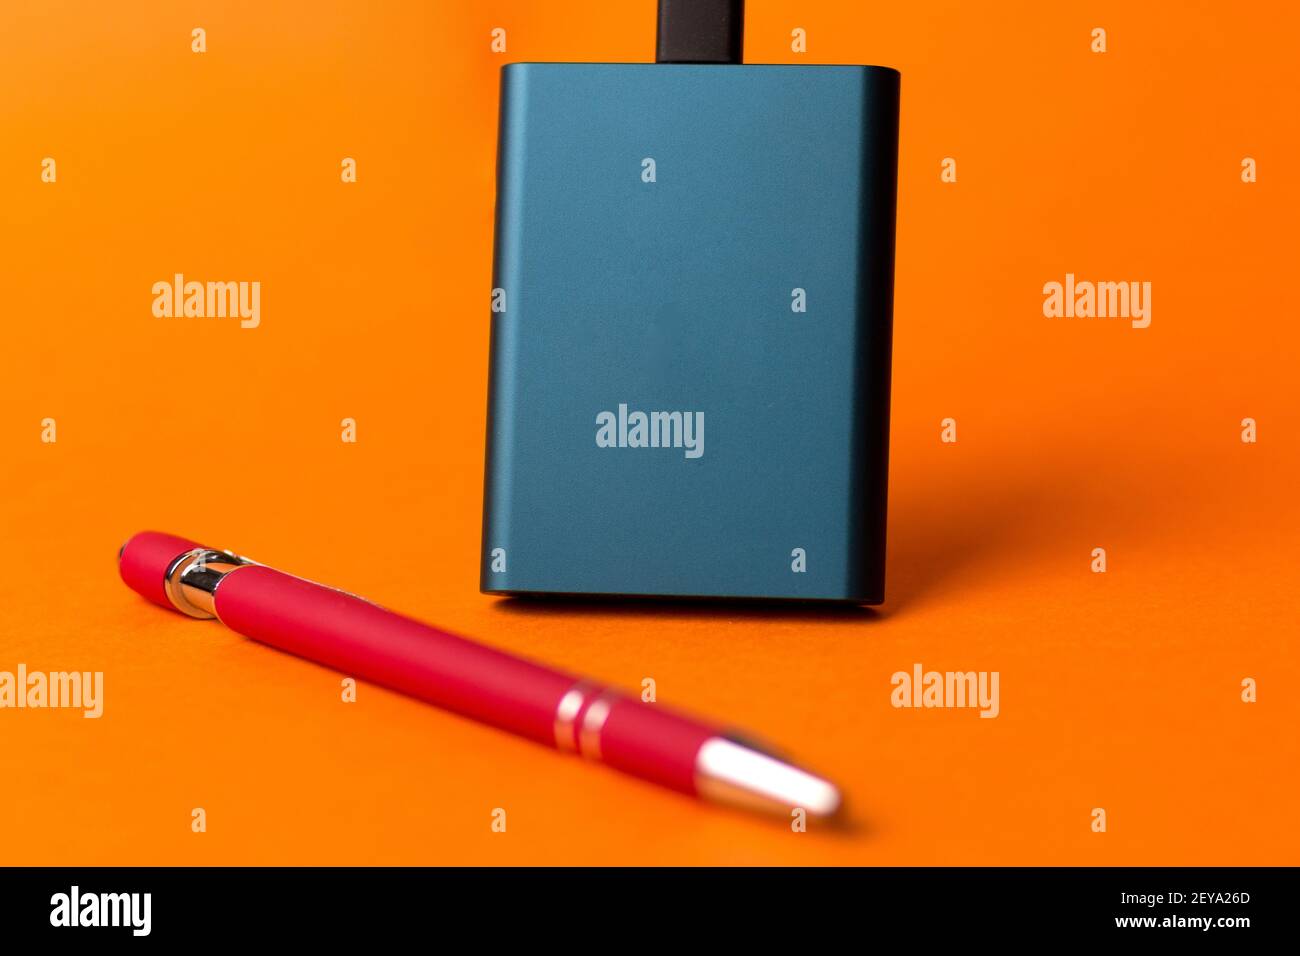 An external SSD disk and a red pen isolated on an orange background Stock Photo